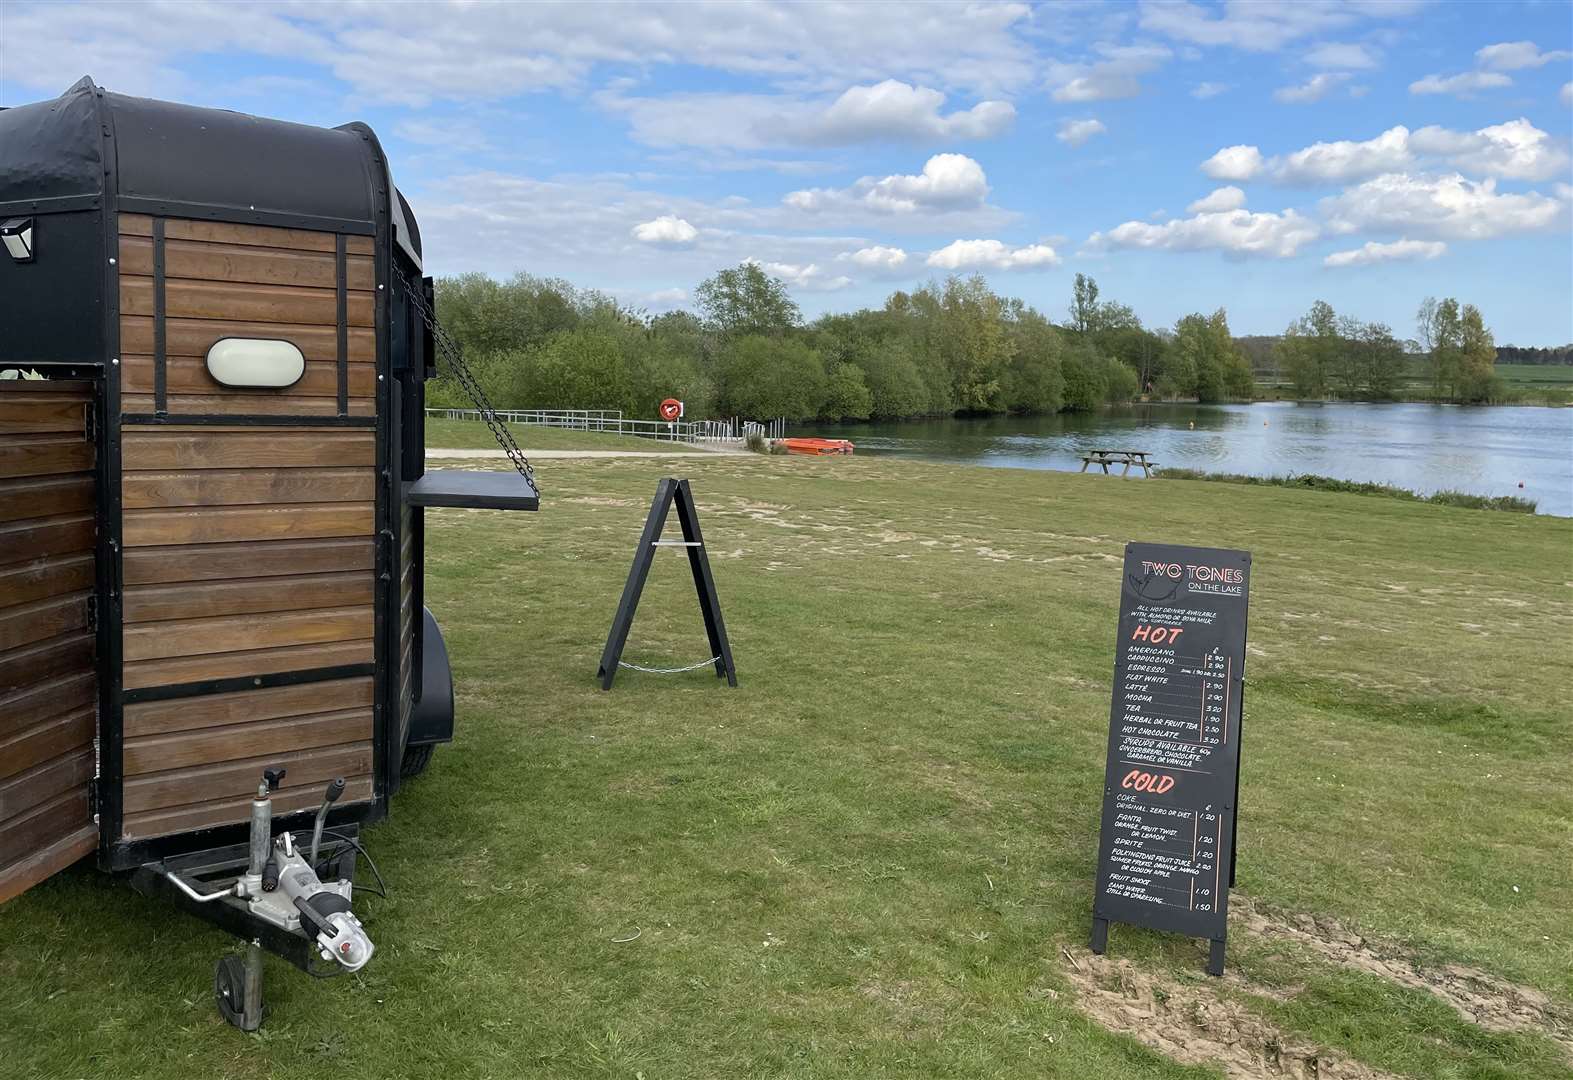 Two Tones coffee will open at Conningbrook Lakes in Ashford on Saturday